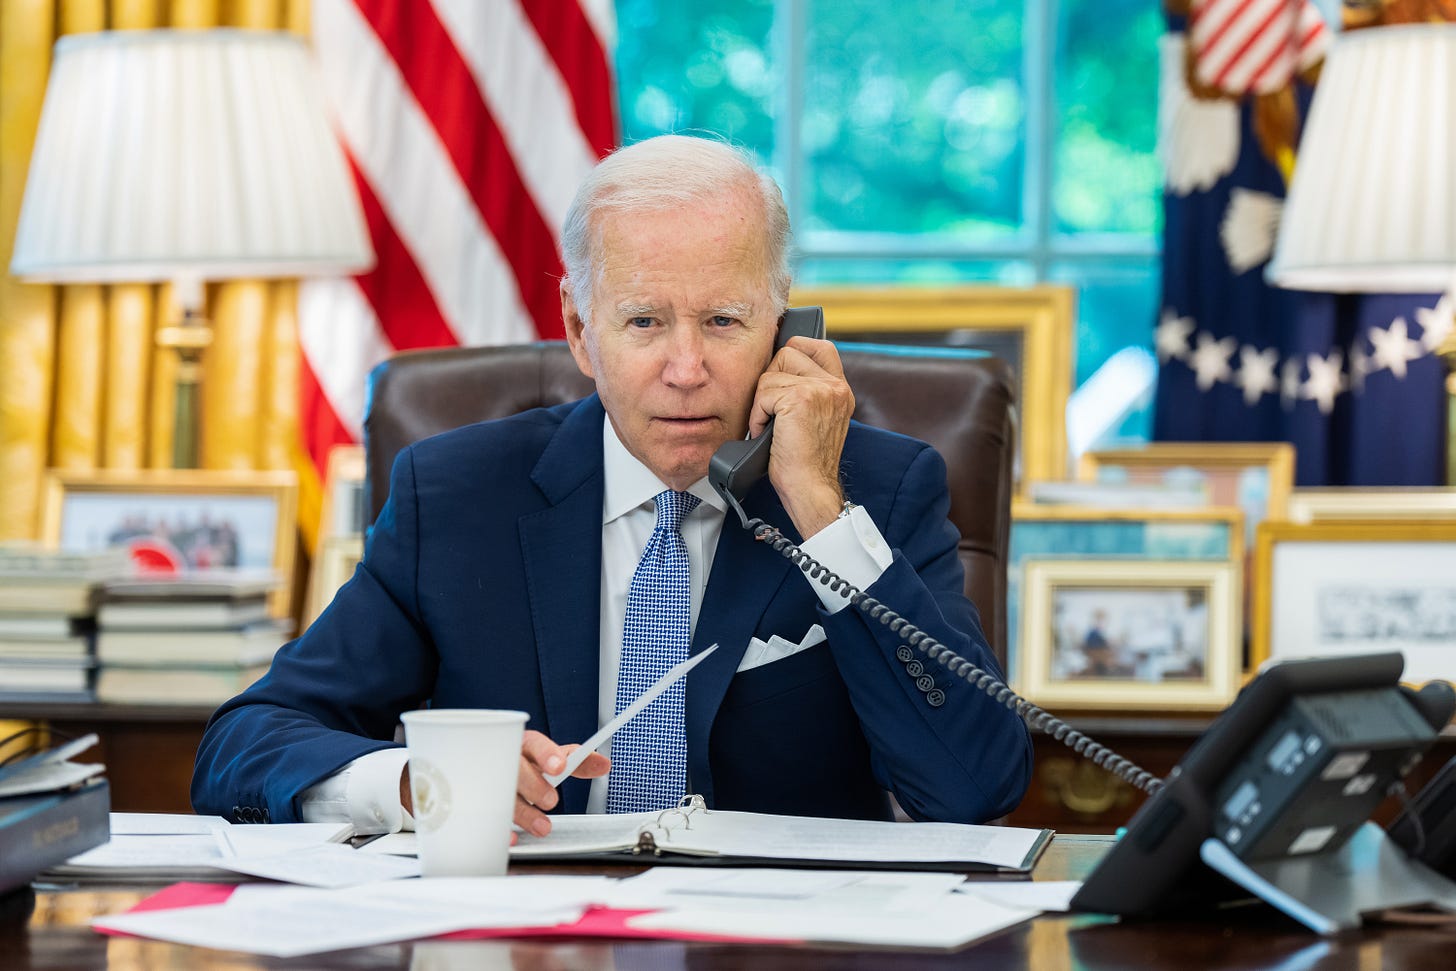 US President Joe Biden during his telephonic conversation with his Chinese counterpart Xi Jinping on July 28, 2022 (Image: Twitter/@POTUS and White House).